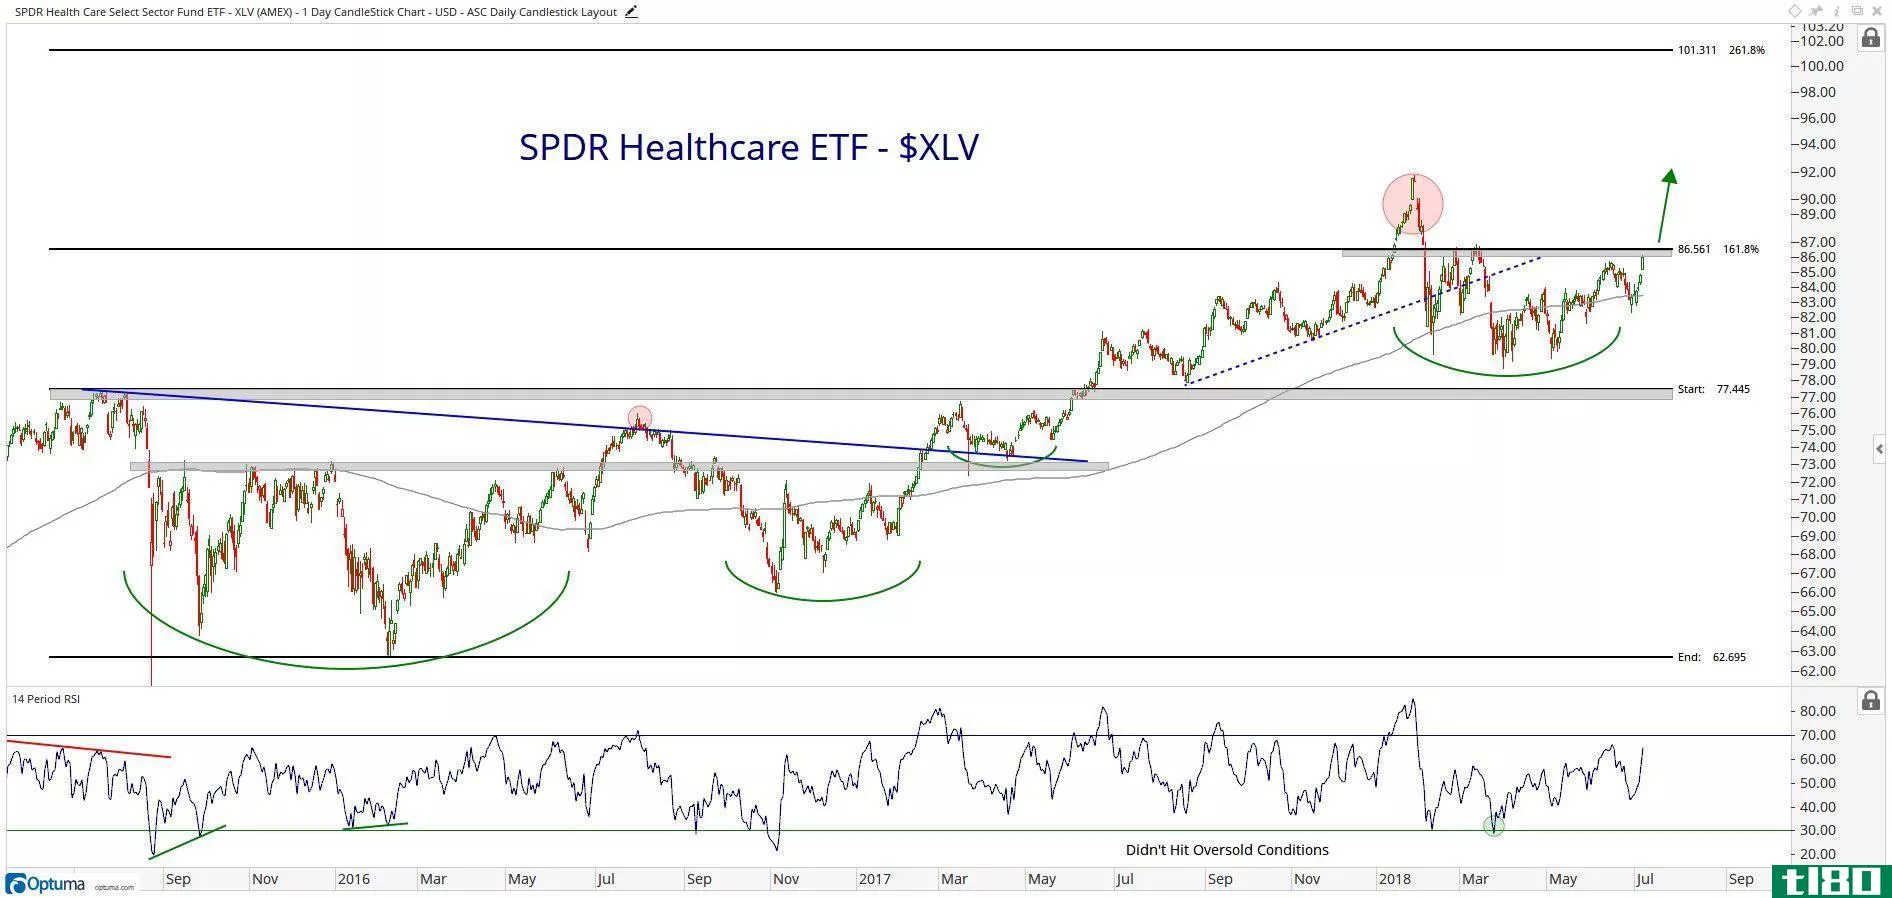 Chart showing performance of Health Care Select Sector SPDR ETF (XLV)